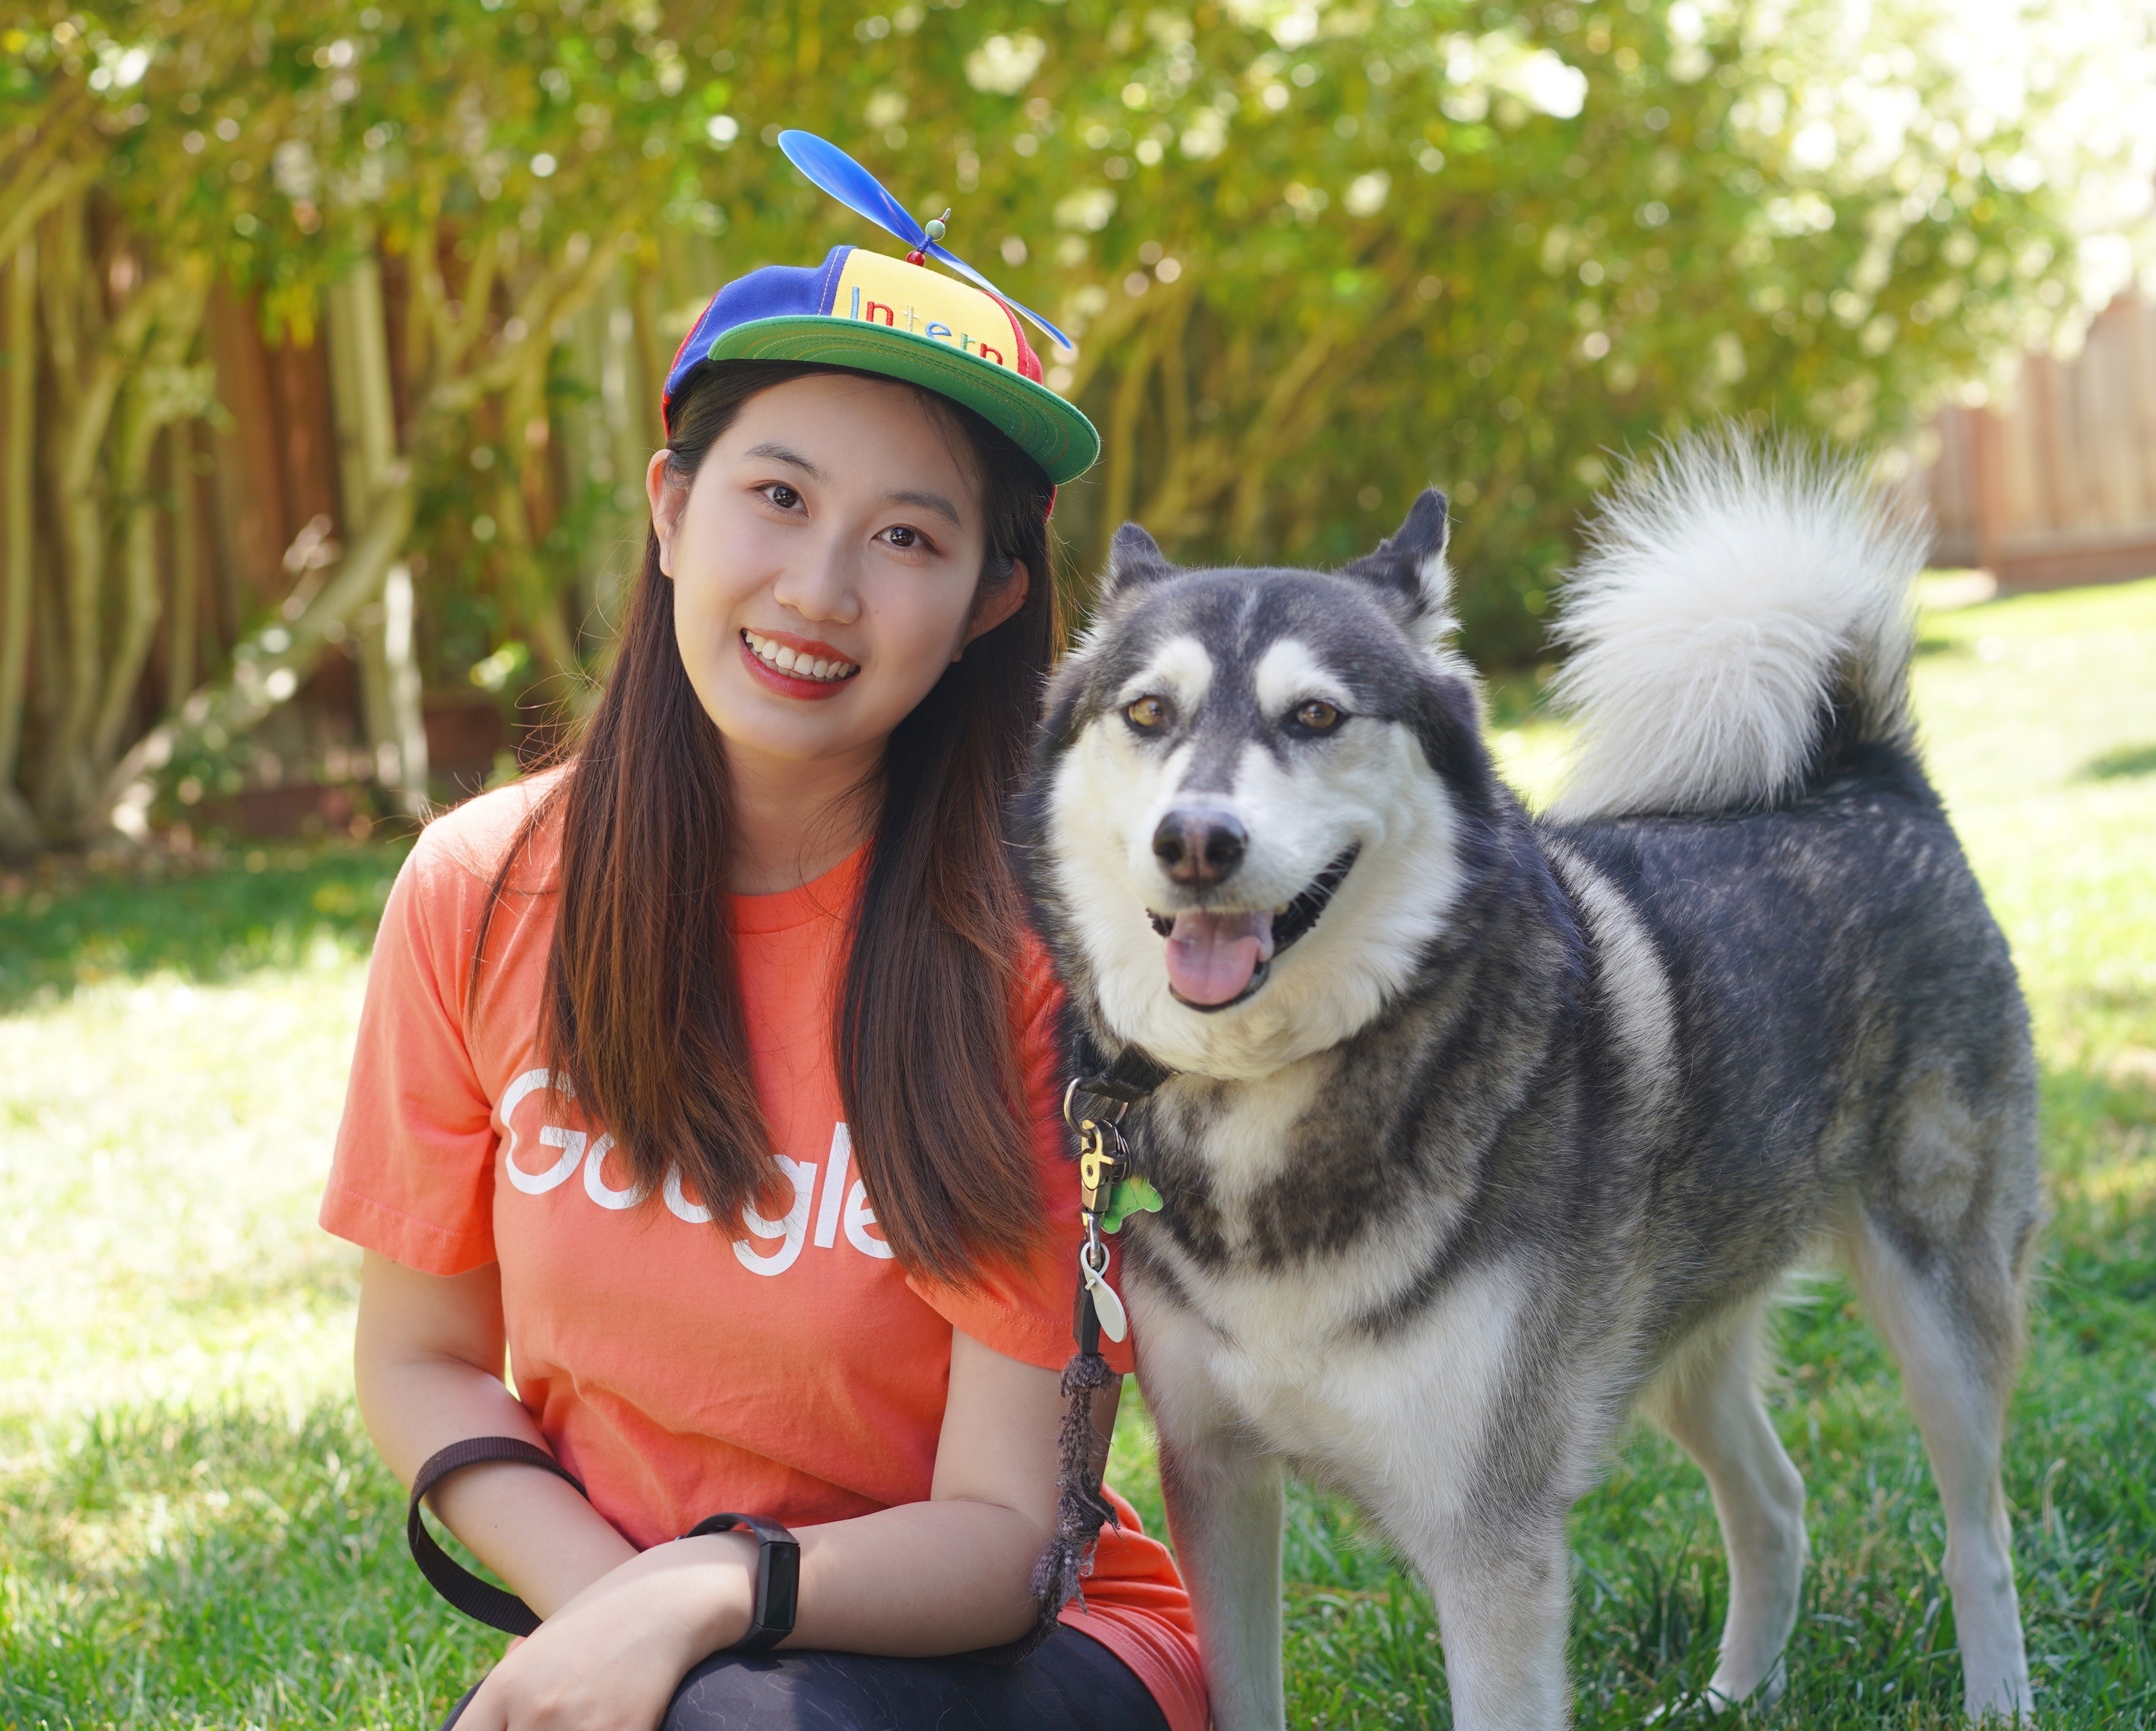 student yiyuan zhu poses for a photo with her pet husky